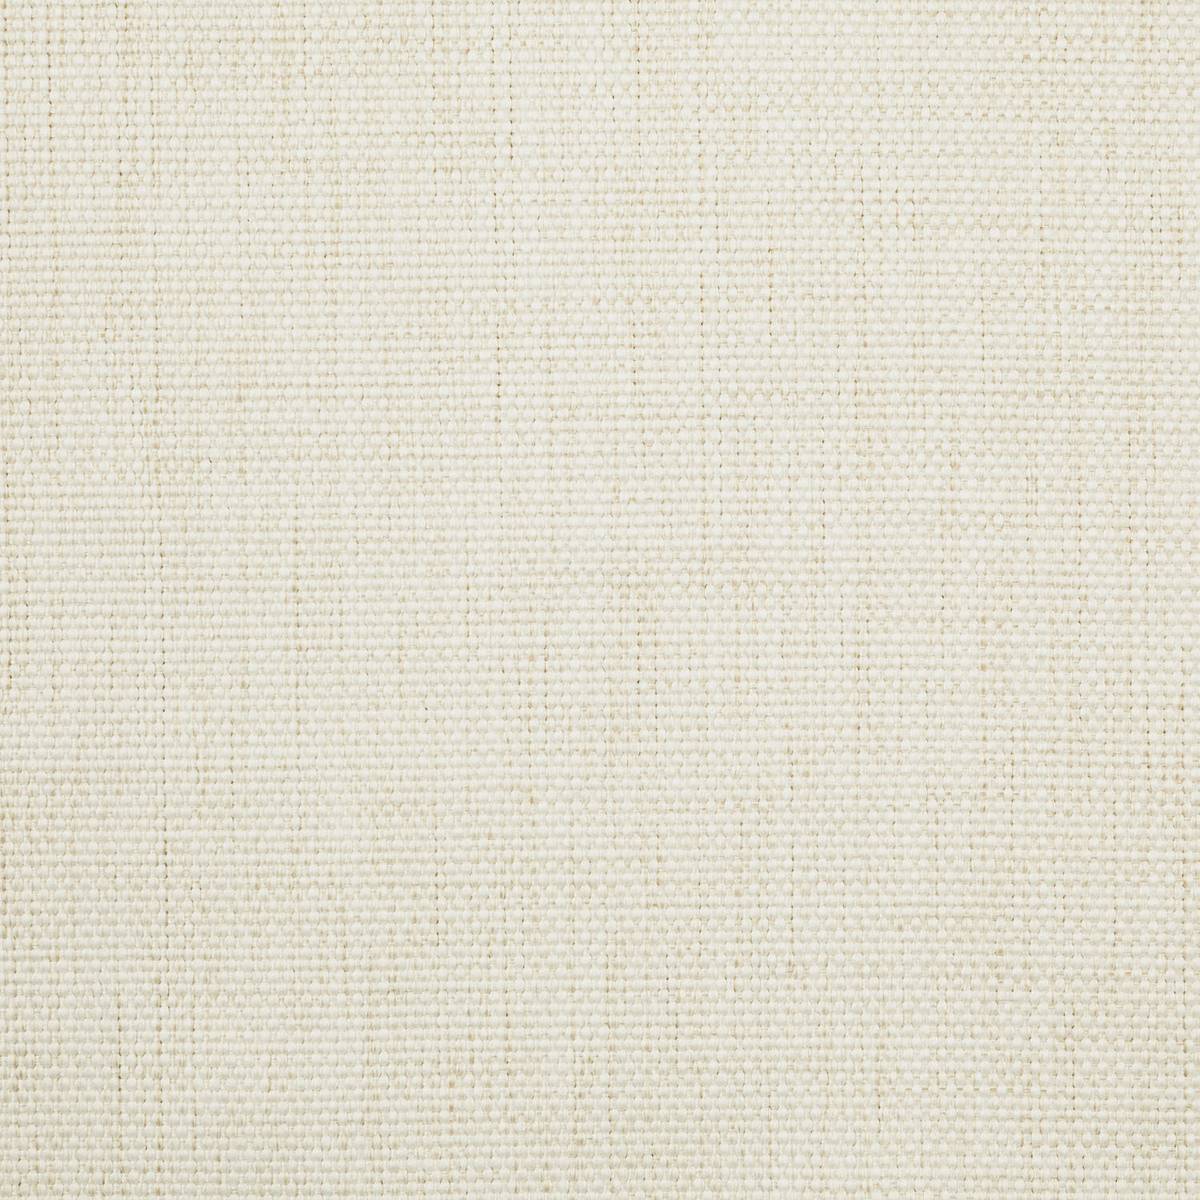 Function Ricepaper Fabric by Harlequin